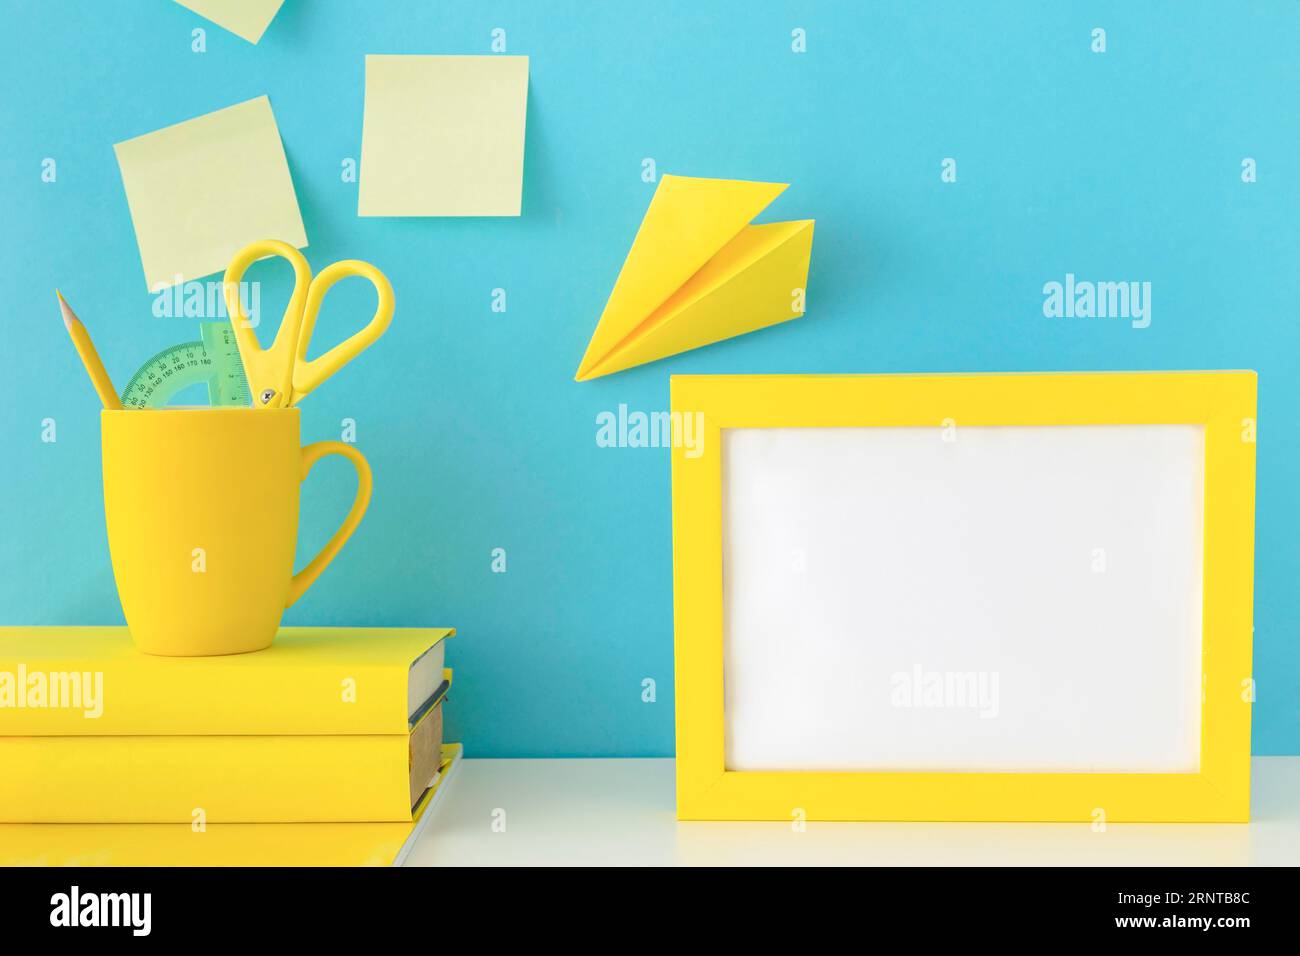 Stylish workplace with yellow frame paper plane Stock Photo